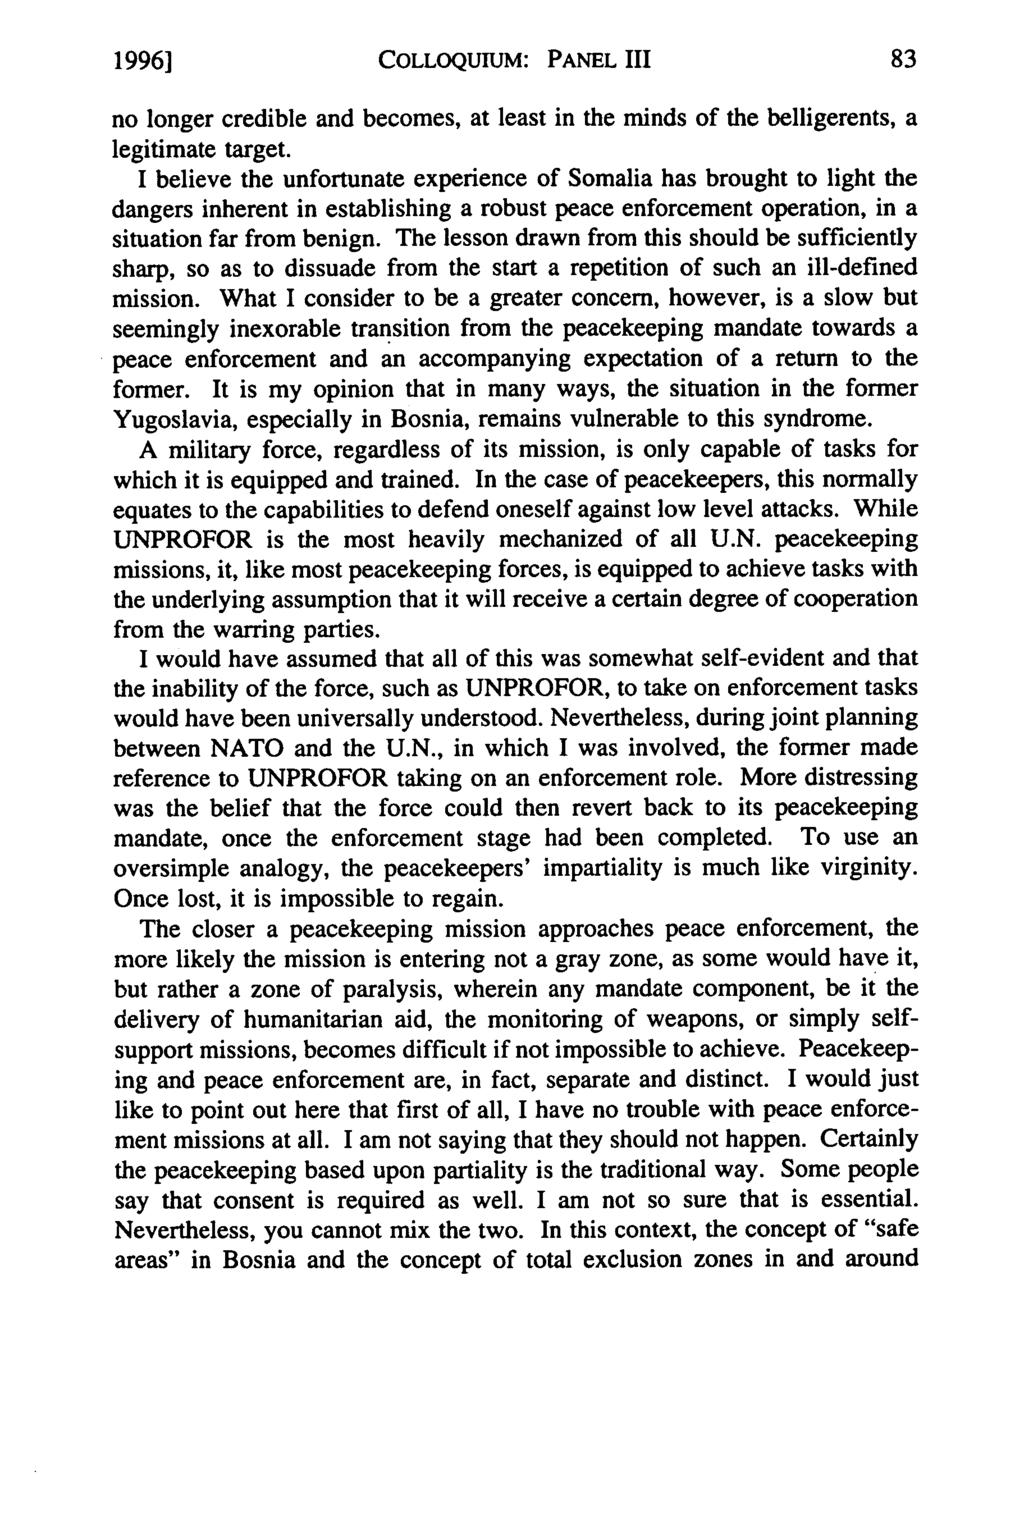 19961 COLLOQUIUM: PANEL III no longer credible and becomes, at least in the minds of the belligerents, a legitimate target.